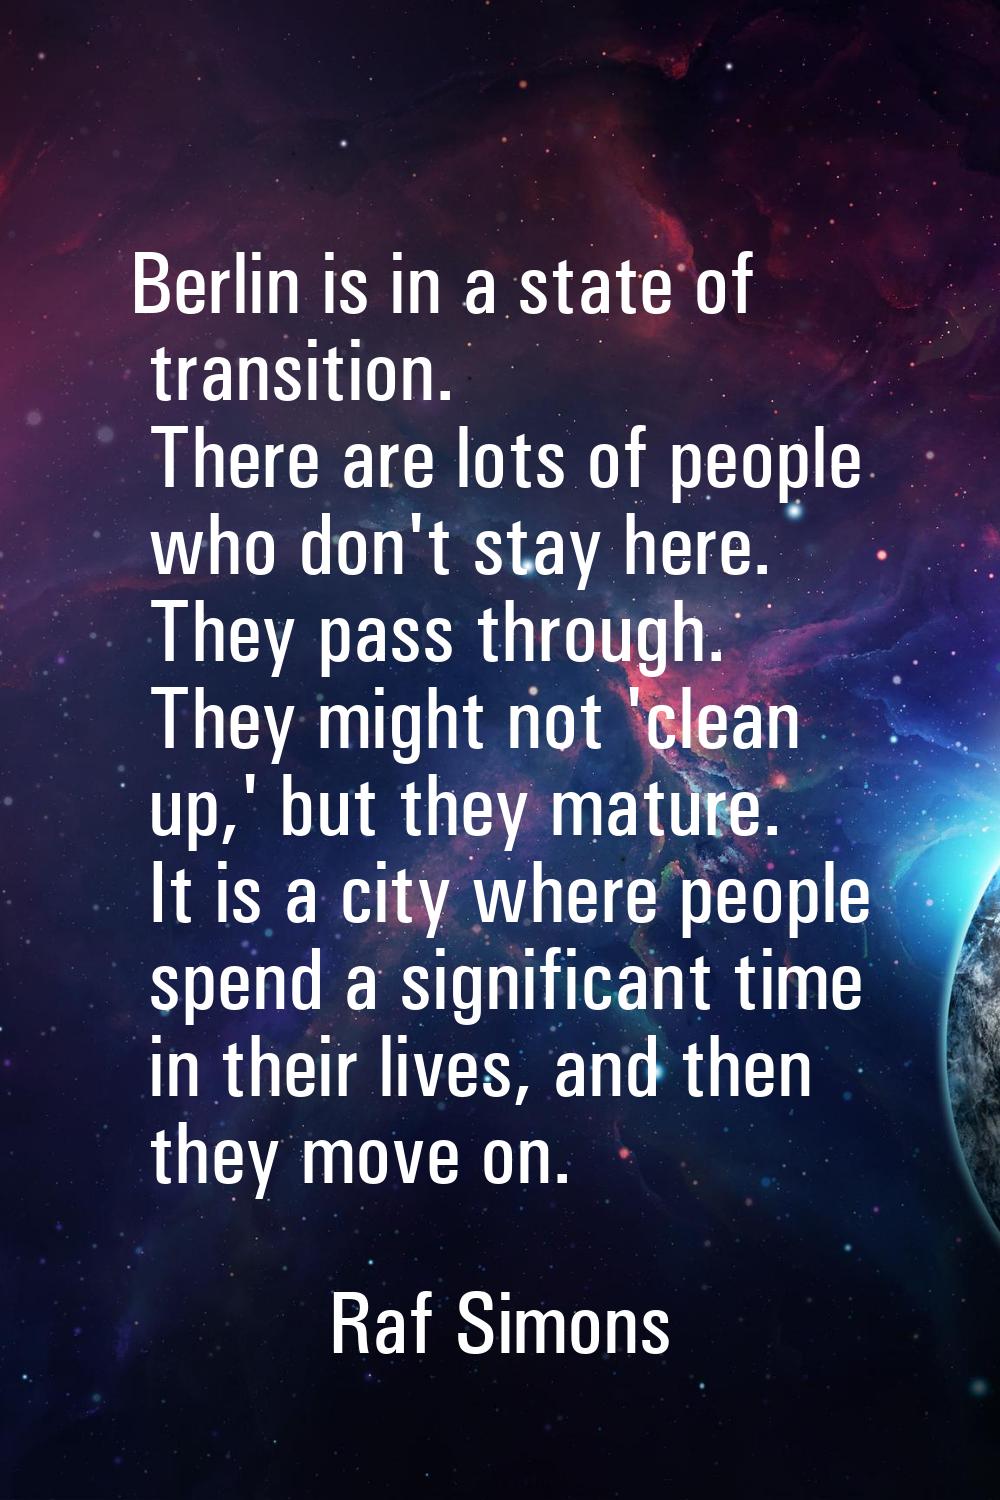 Berlin is in a state of transition. There are lots of people who don't stay here. They pass through